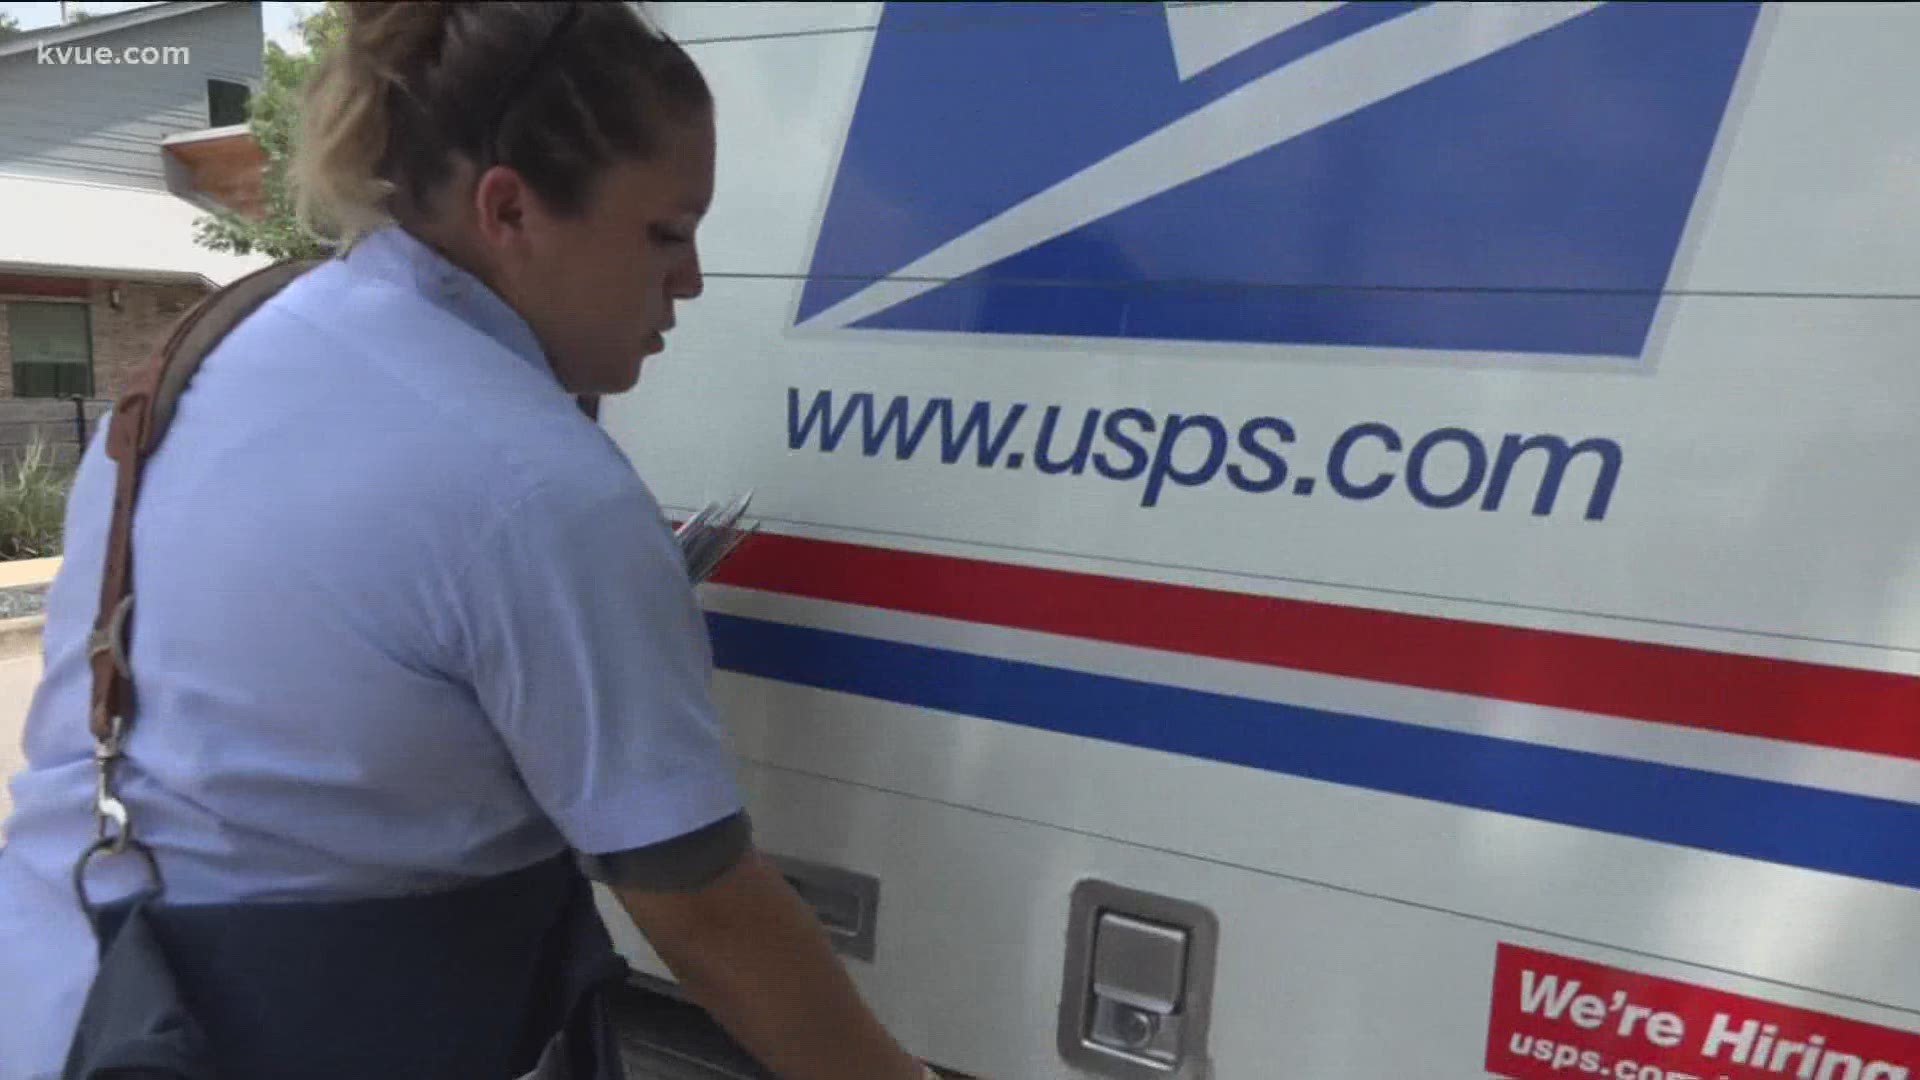 The United States Postal Service is hiring 100 city carrier assistants in Austin. Starting pay is $18.51 an hour.